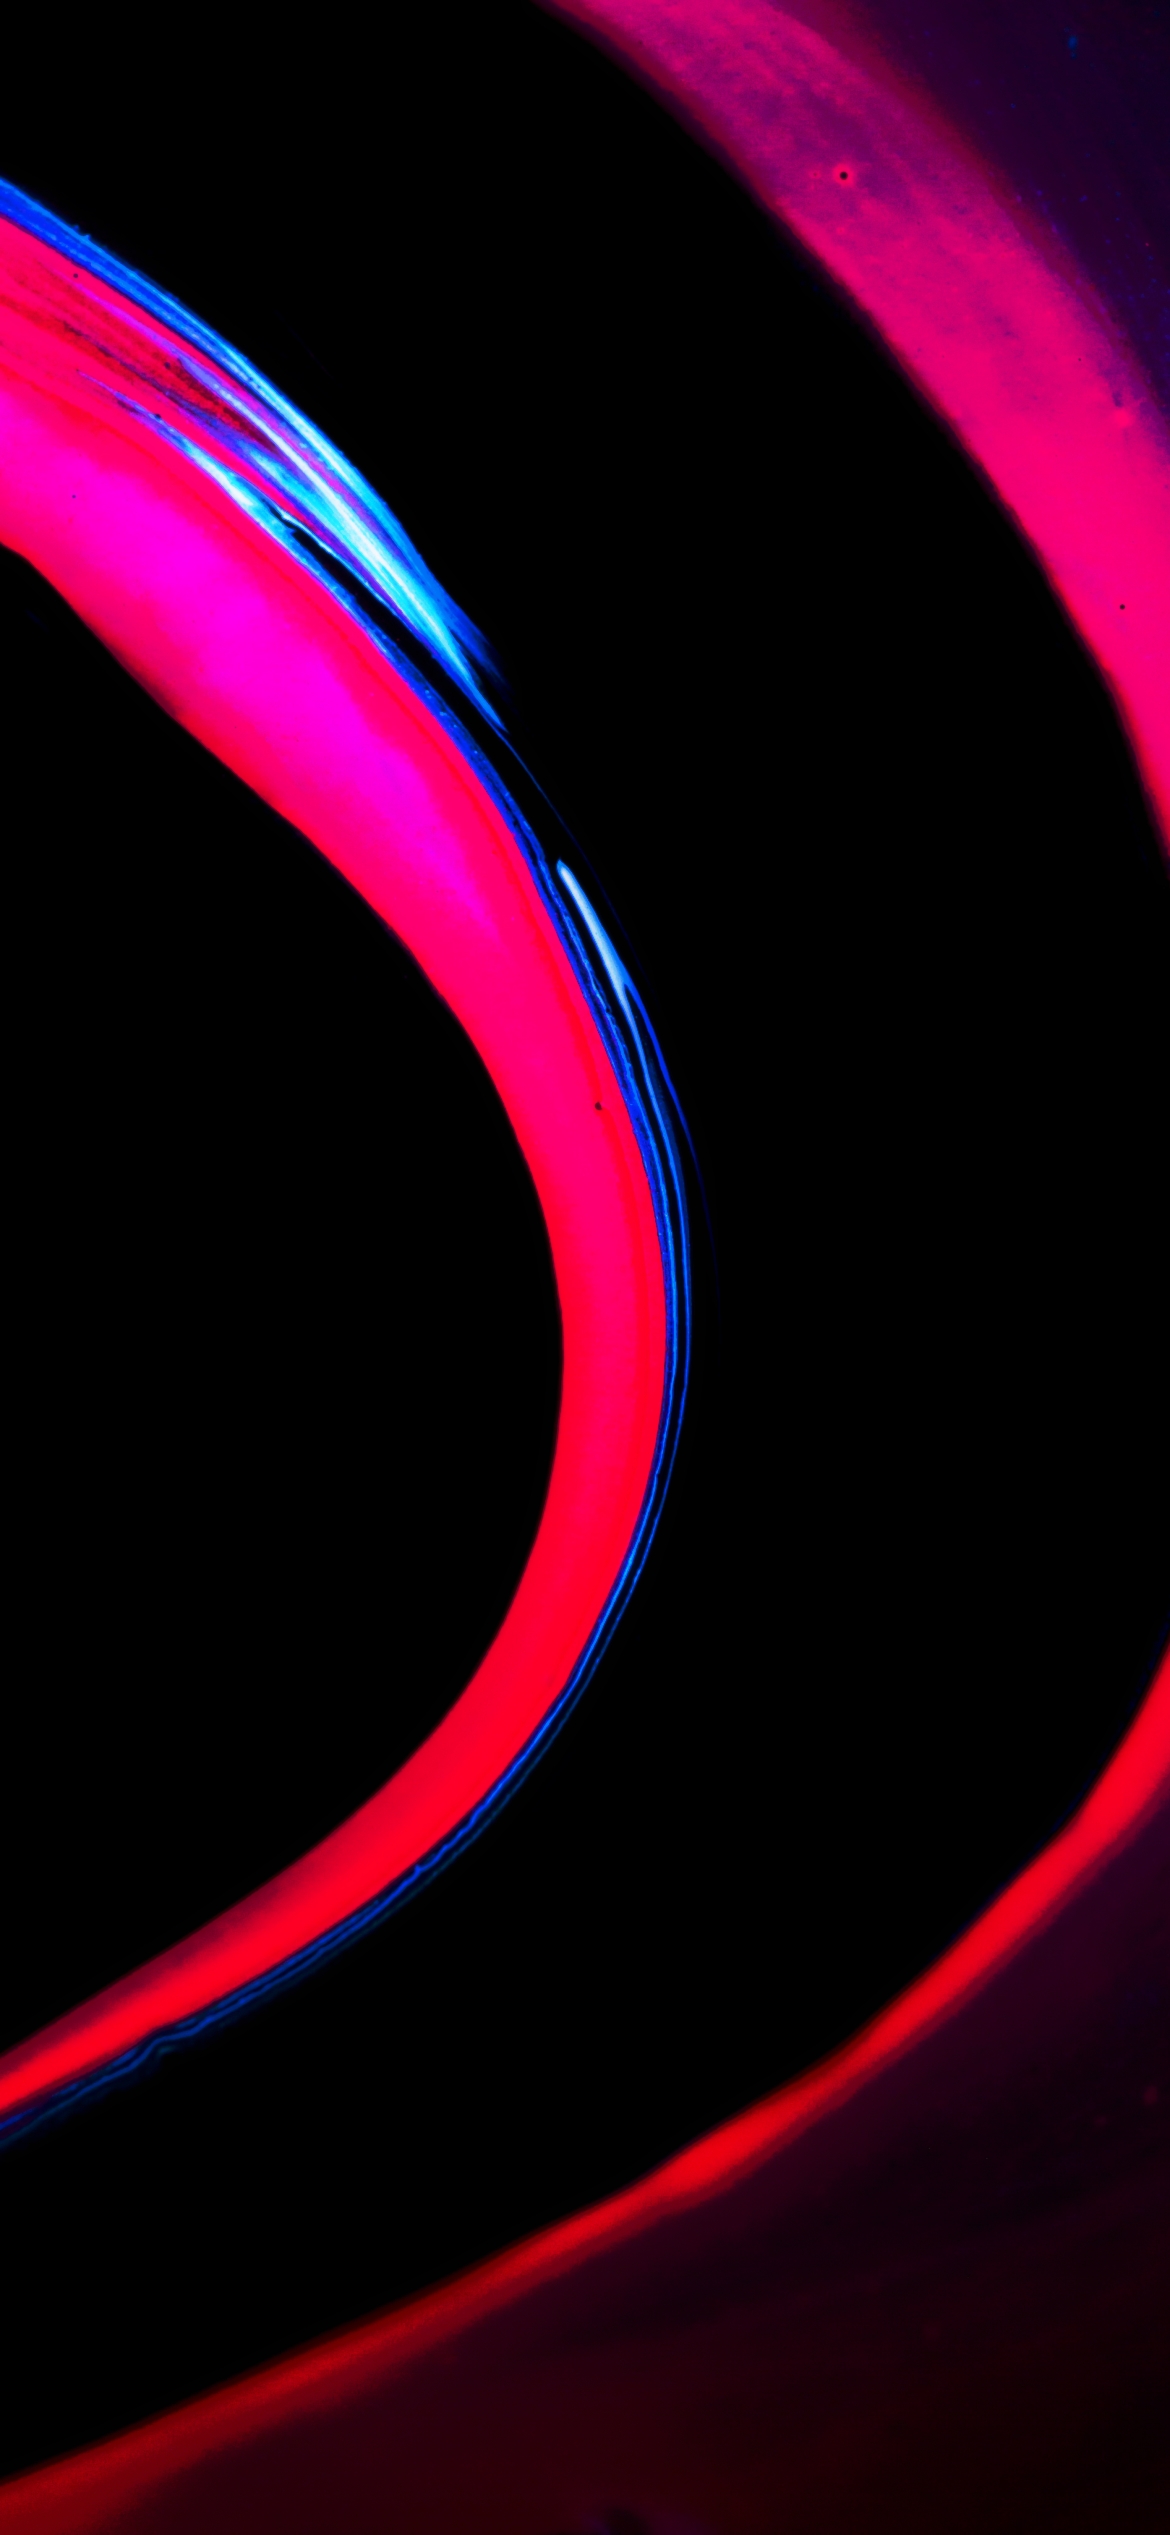 14 beautiful and abstract phone wallpapers